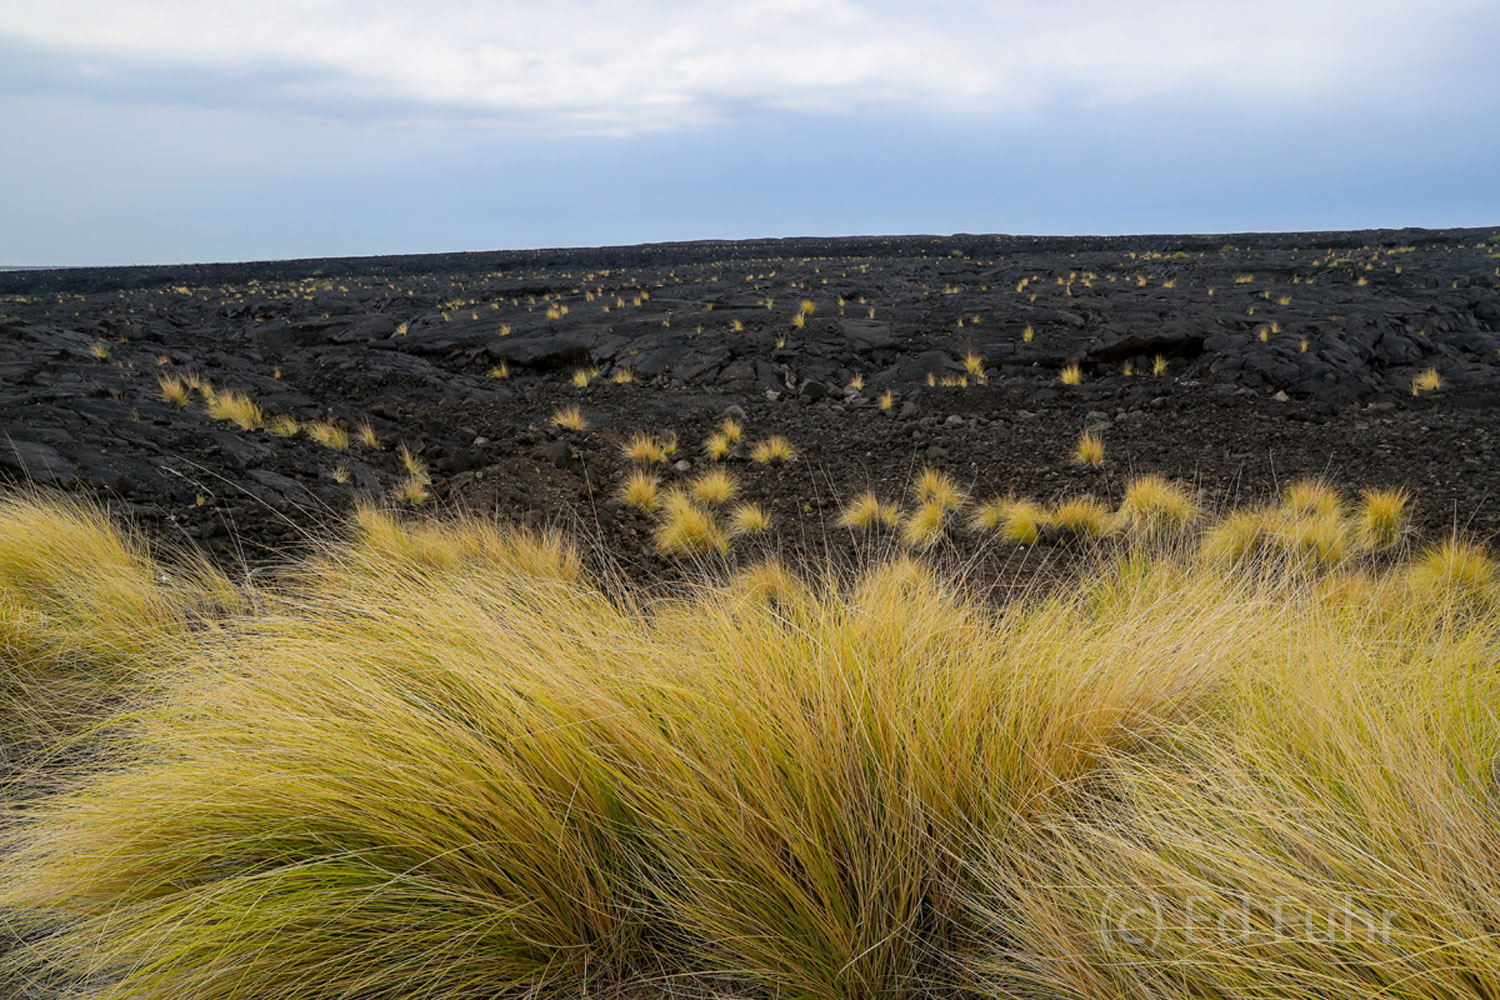 Large swaths of the Big Island are essentially barren black lava deserts of rock and stone.  While it would seem that nothing...